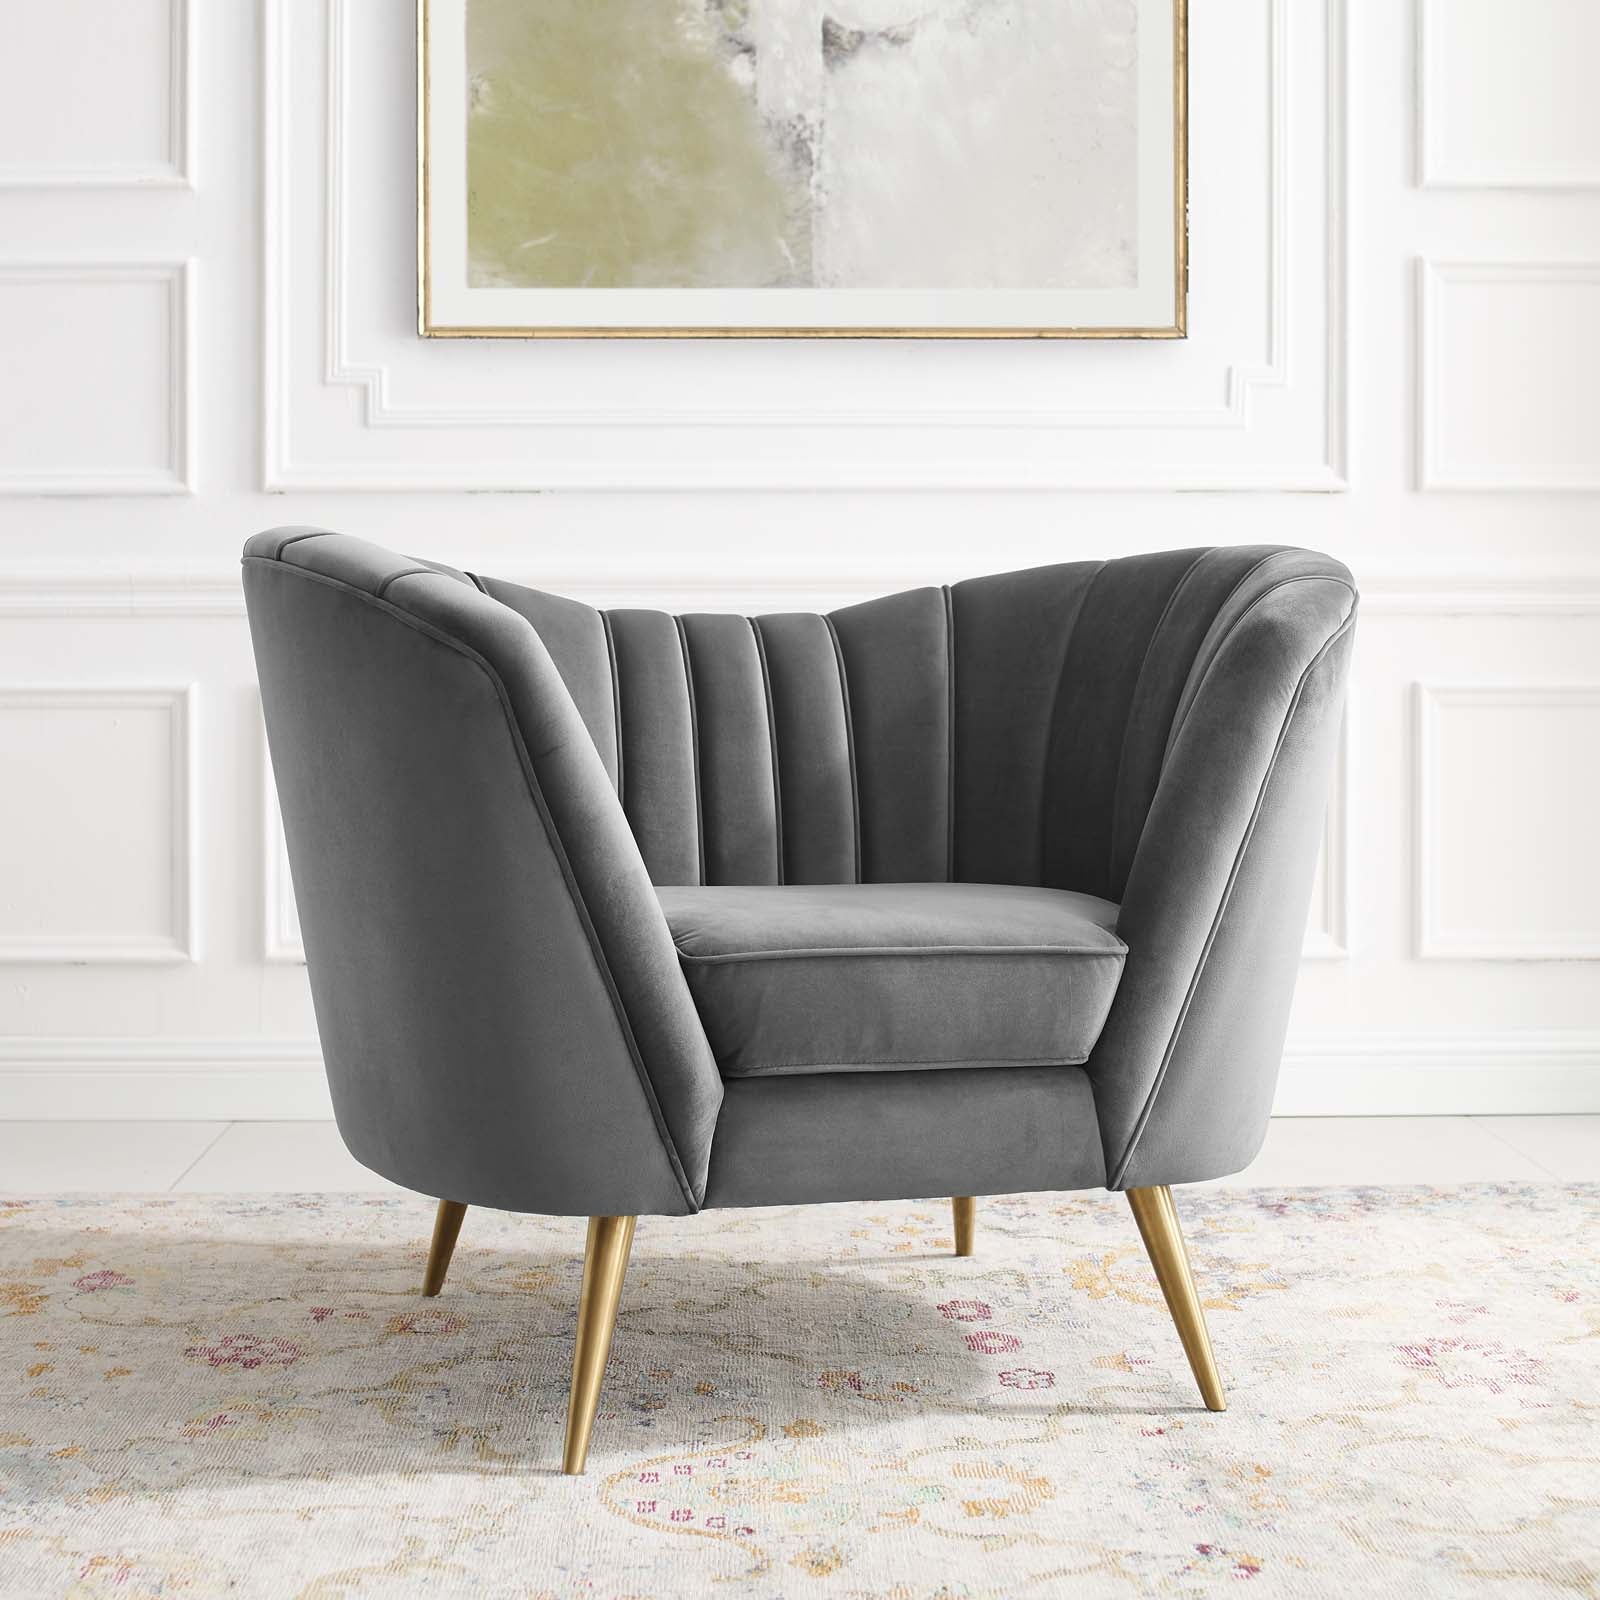 Modway Accent Chairs - Opportunity Performance Velvet Armchair Gray